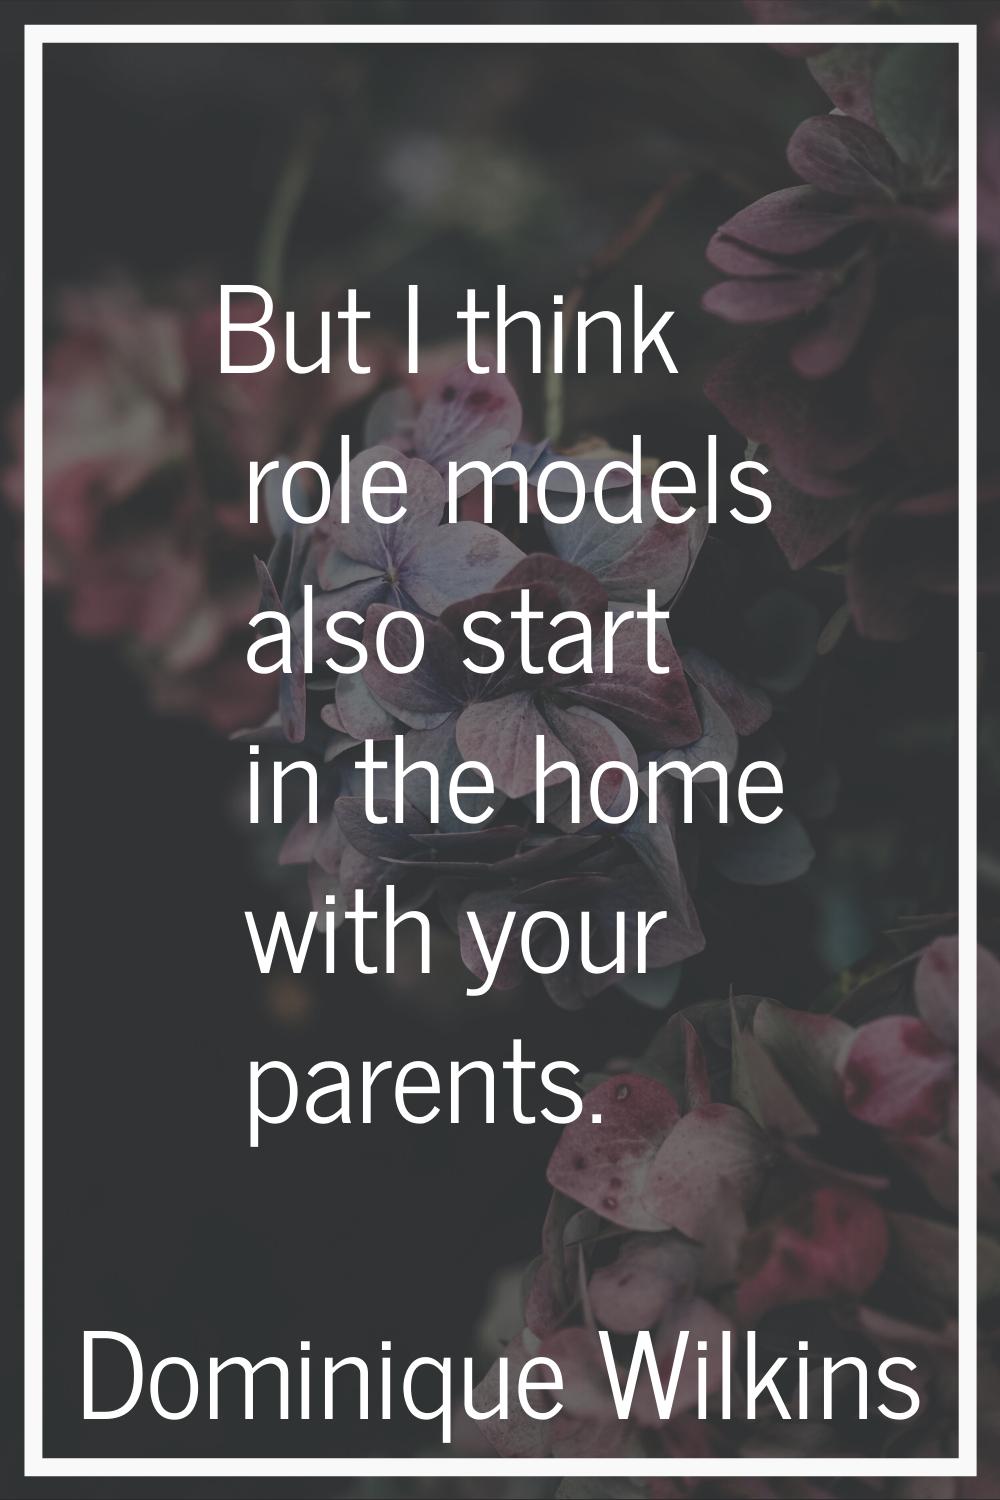 But I think role models also start in the home with your parents.